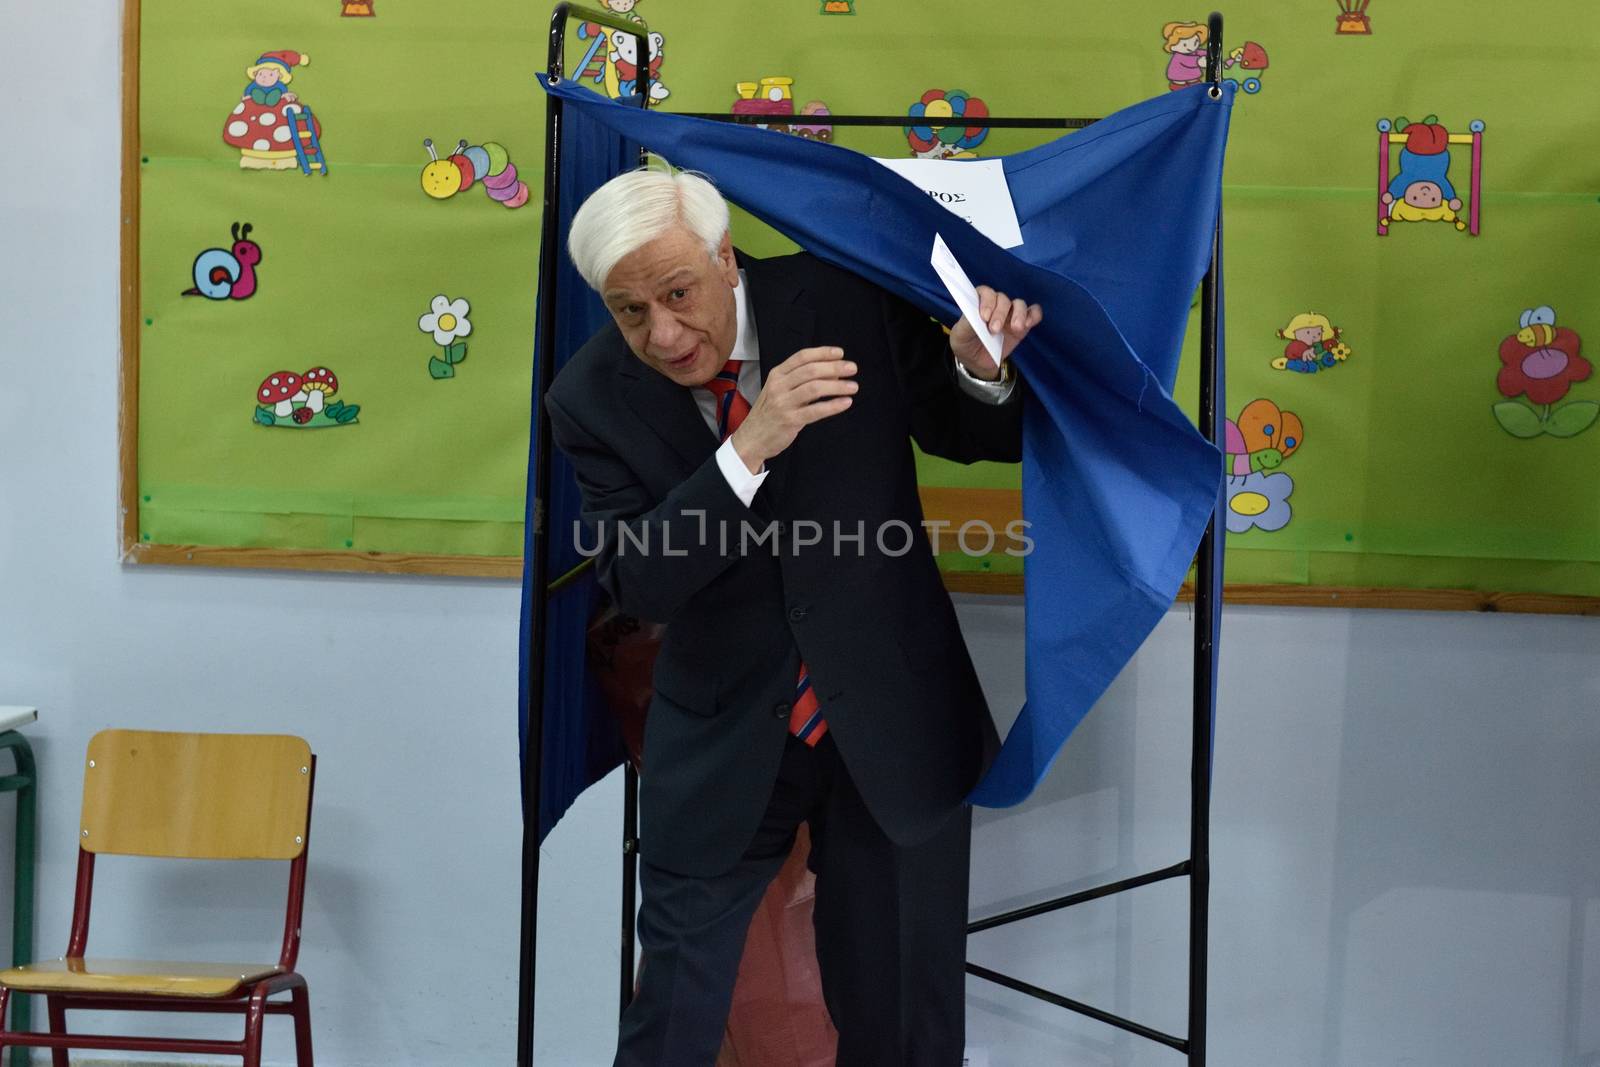 GREECE - ATHENS - ELECTION - HELLENIC REPUBLIC - PAVLOPOULOS by newzulu